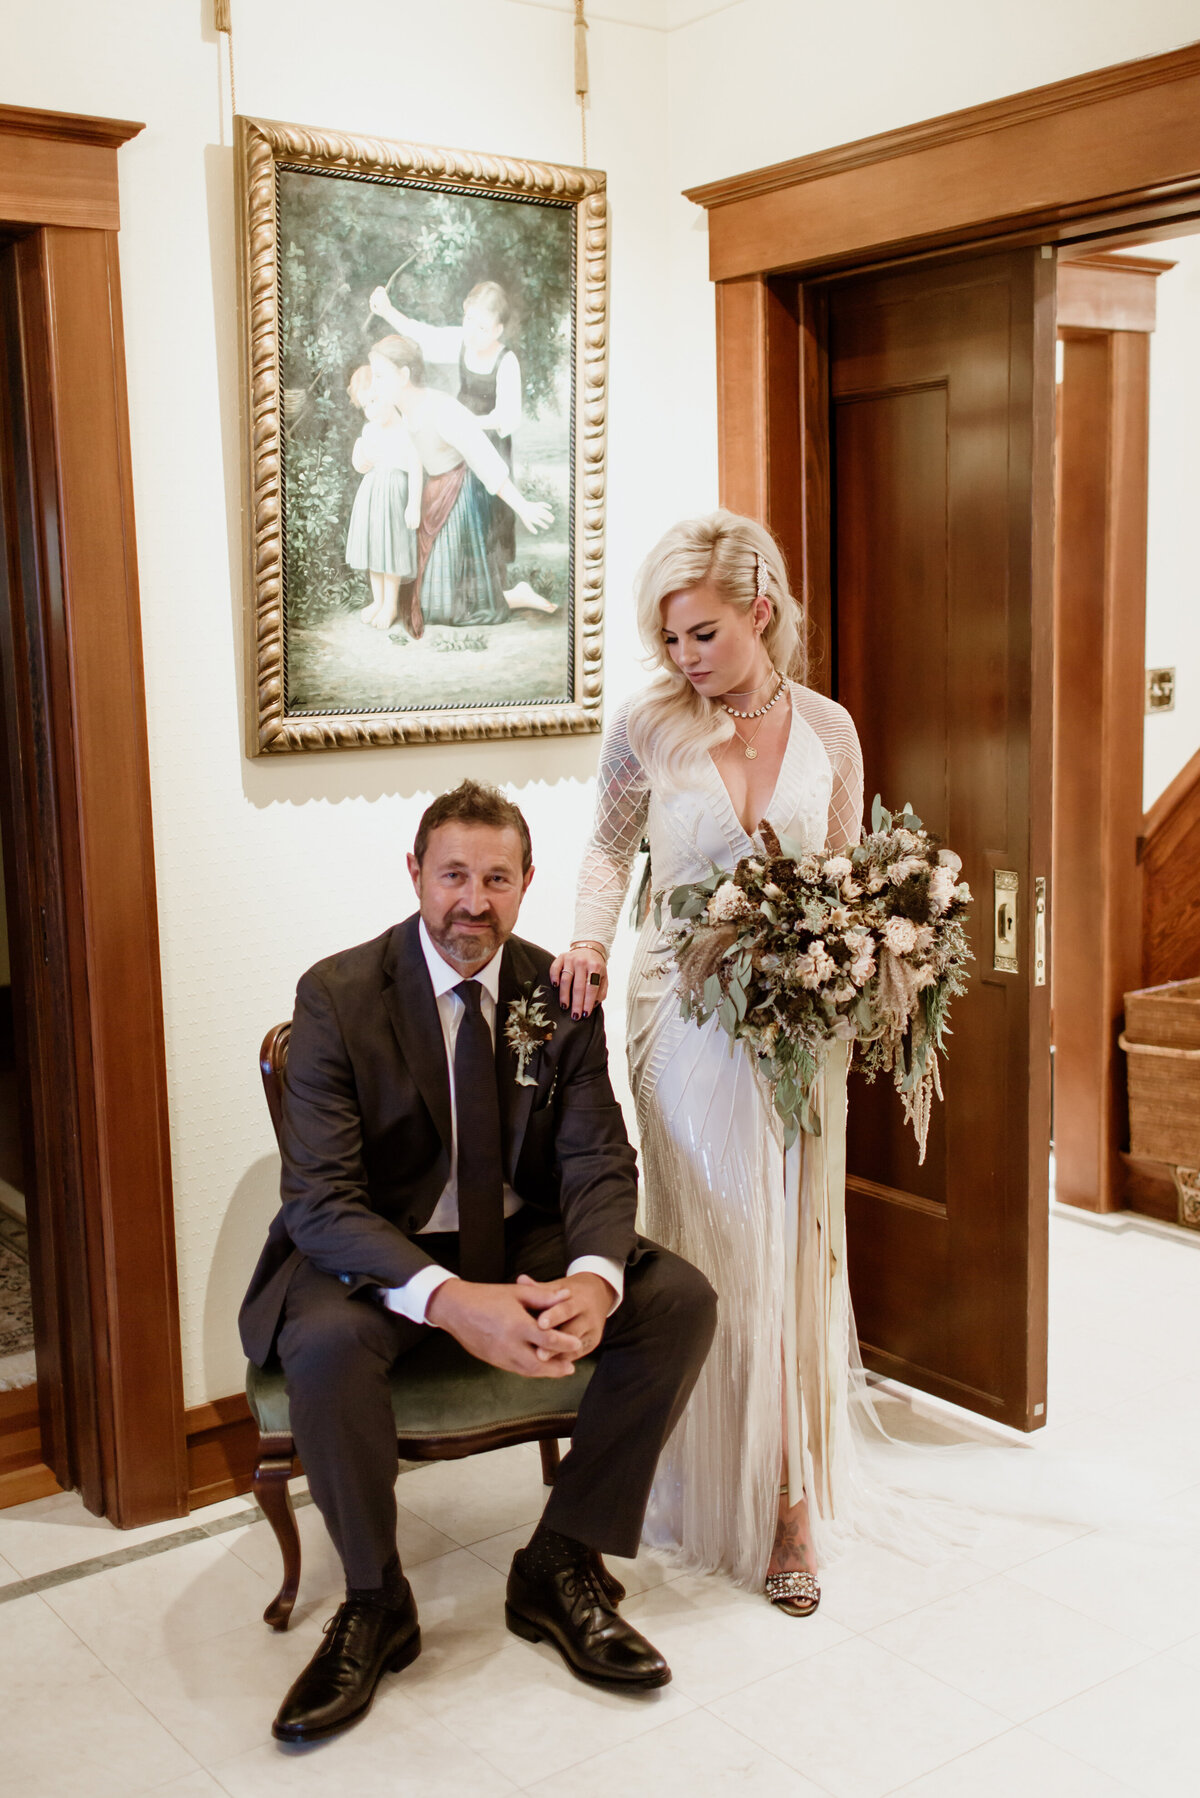 A beautiful indoor portrait of a couple in wedding attire captured by Fort Worth Wedding Photographer, Megan Christine Studio